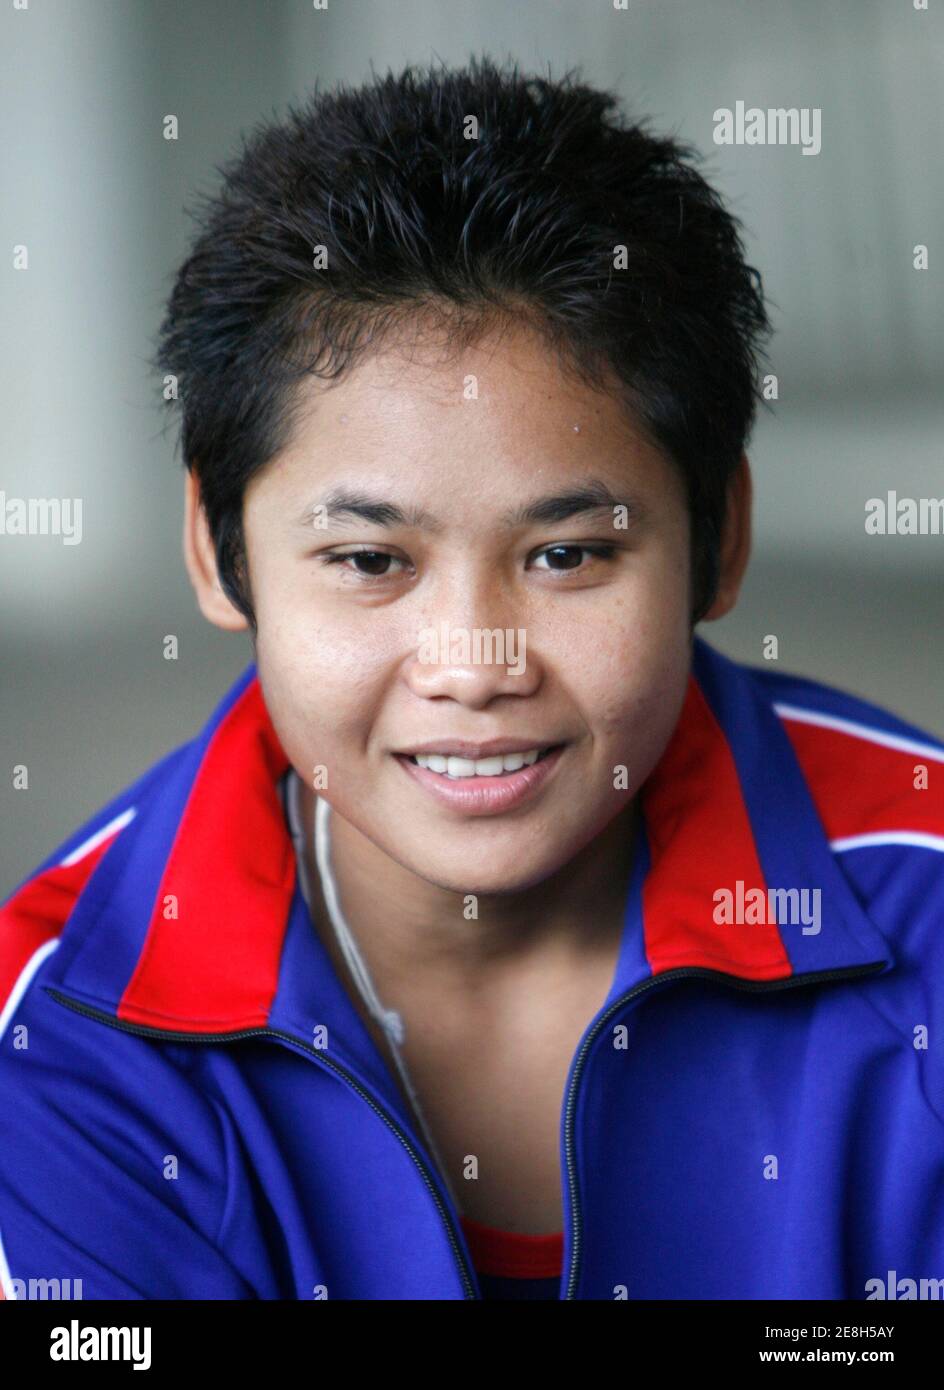 Convicted drugs dealer Samson Sor Siriporn Taweesook, 24, smiles before being released on parole from the Women's Correctional Institution for Drug Addicts in Pathum Thani province, on the outskirts of Bangkok, June 13, 2007. Siriporn was released three years earlier as a reward for winning the World Boxing Council (WBC) female light flyweight title. She was caught selling 'ya ba' (crazy drug) or methamphetamine pills 10 years ago. REUTERS/Chaiwat Subprasom (THAILAND) Stock Photo